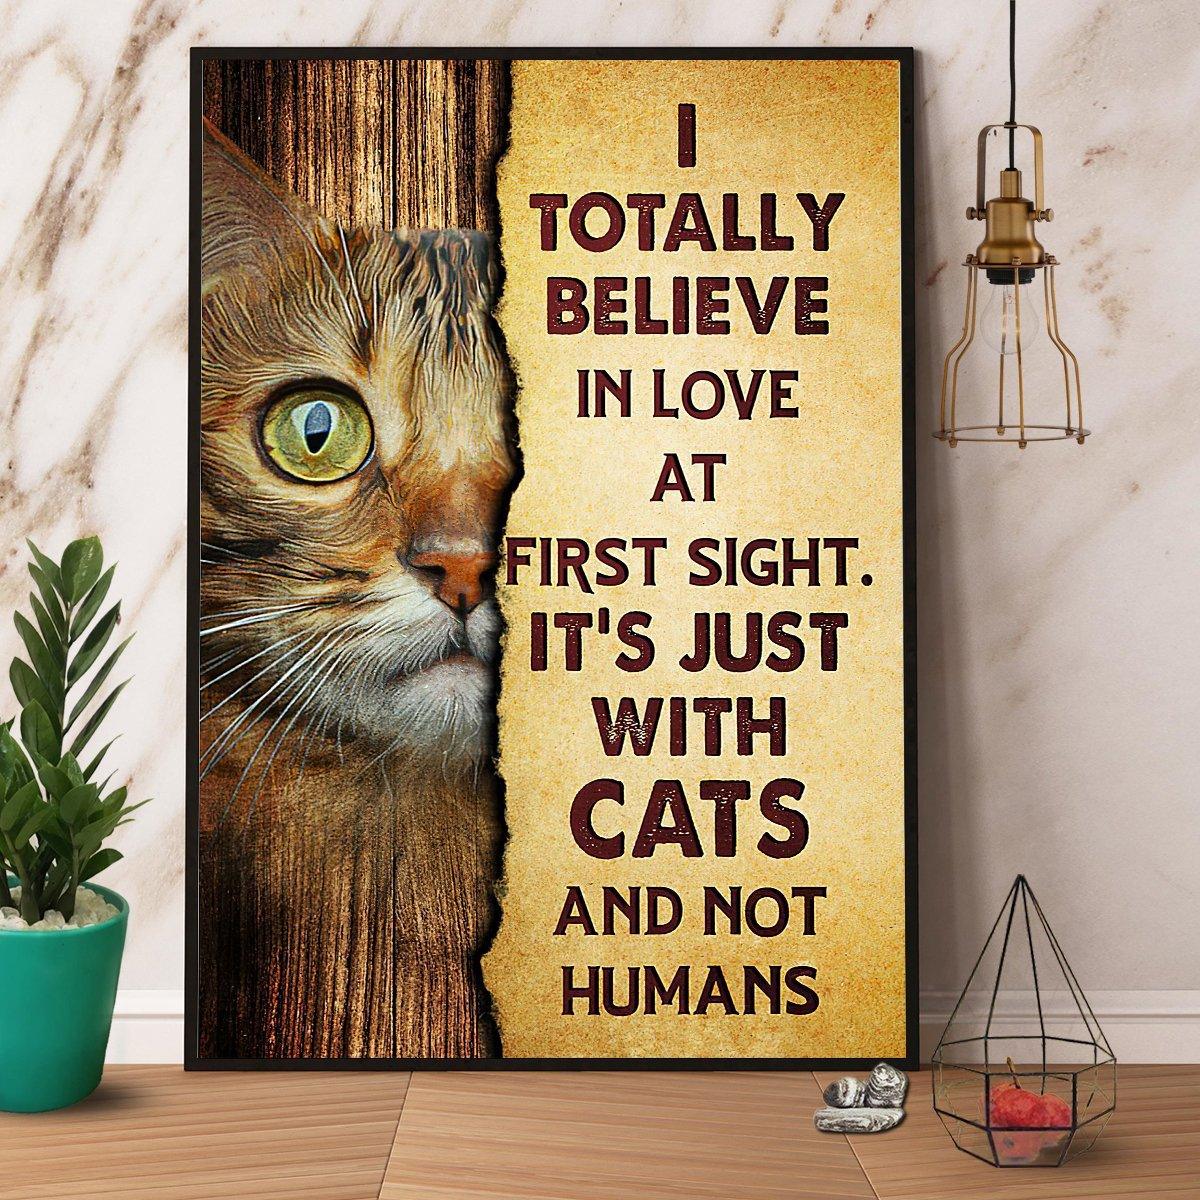 Bengal Cat Portrait Canvas - Bengal Cat I Totally Believe In Love At First Sight - Great Gift For Family, Bengal Cat Lovers, Owners, Cat Lovers - Amzanimalsgift